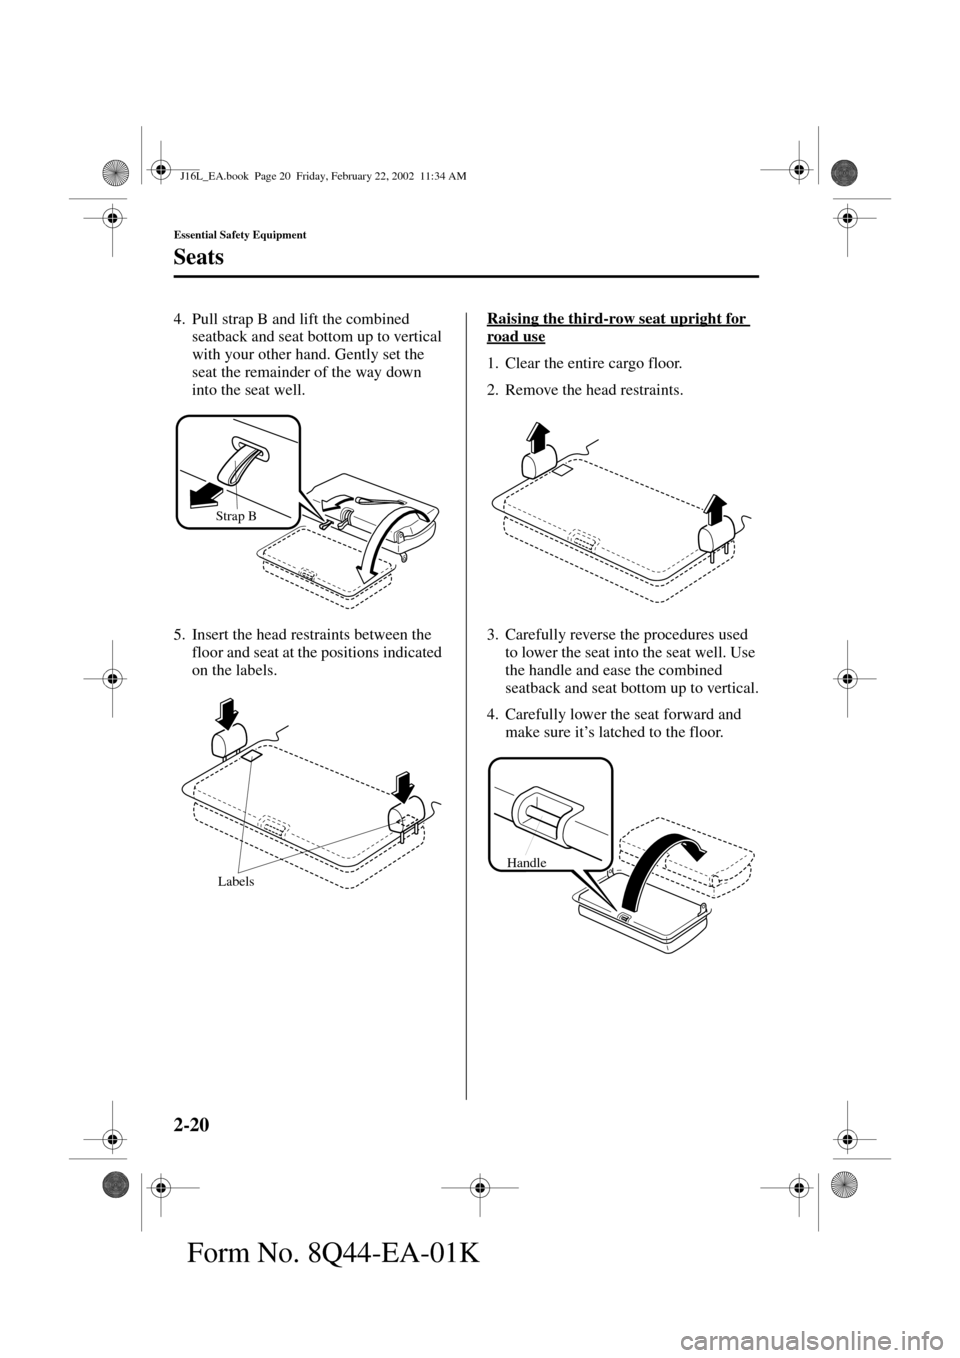 MAZDA MODEL MPV 2002   (in English) Owners Manual 2-20
Essential Safety Equipment
Seats
Form No. 8Q44-EA-01K
4. Pull strap B and lift the combined 
seatback and seat bottom up to vertical 
with your other hand. Gently set the 
seat the remainder of t